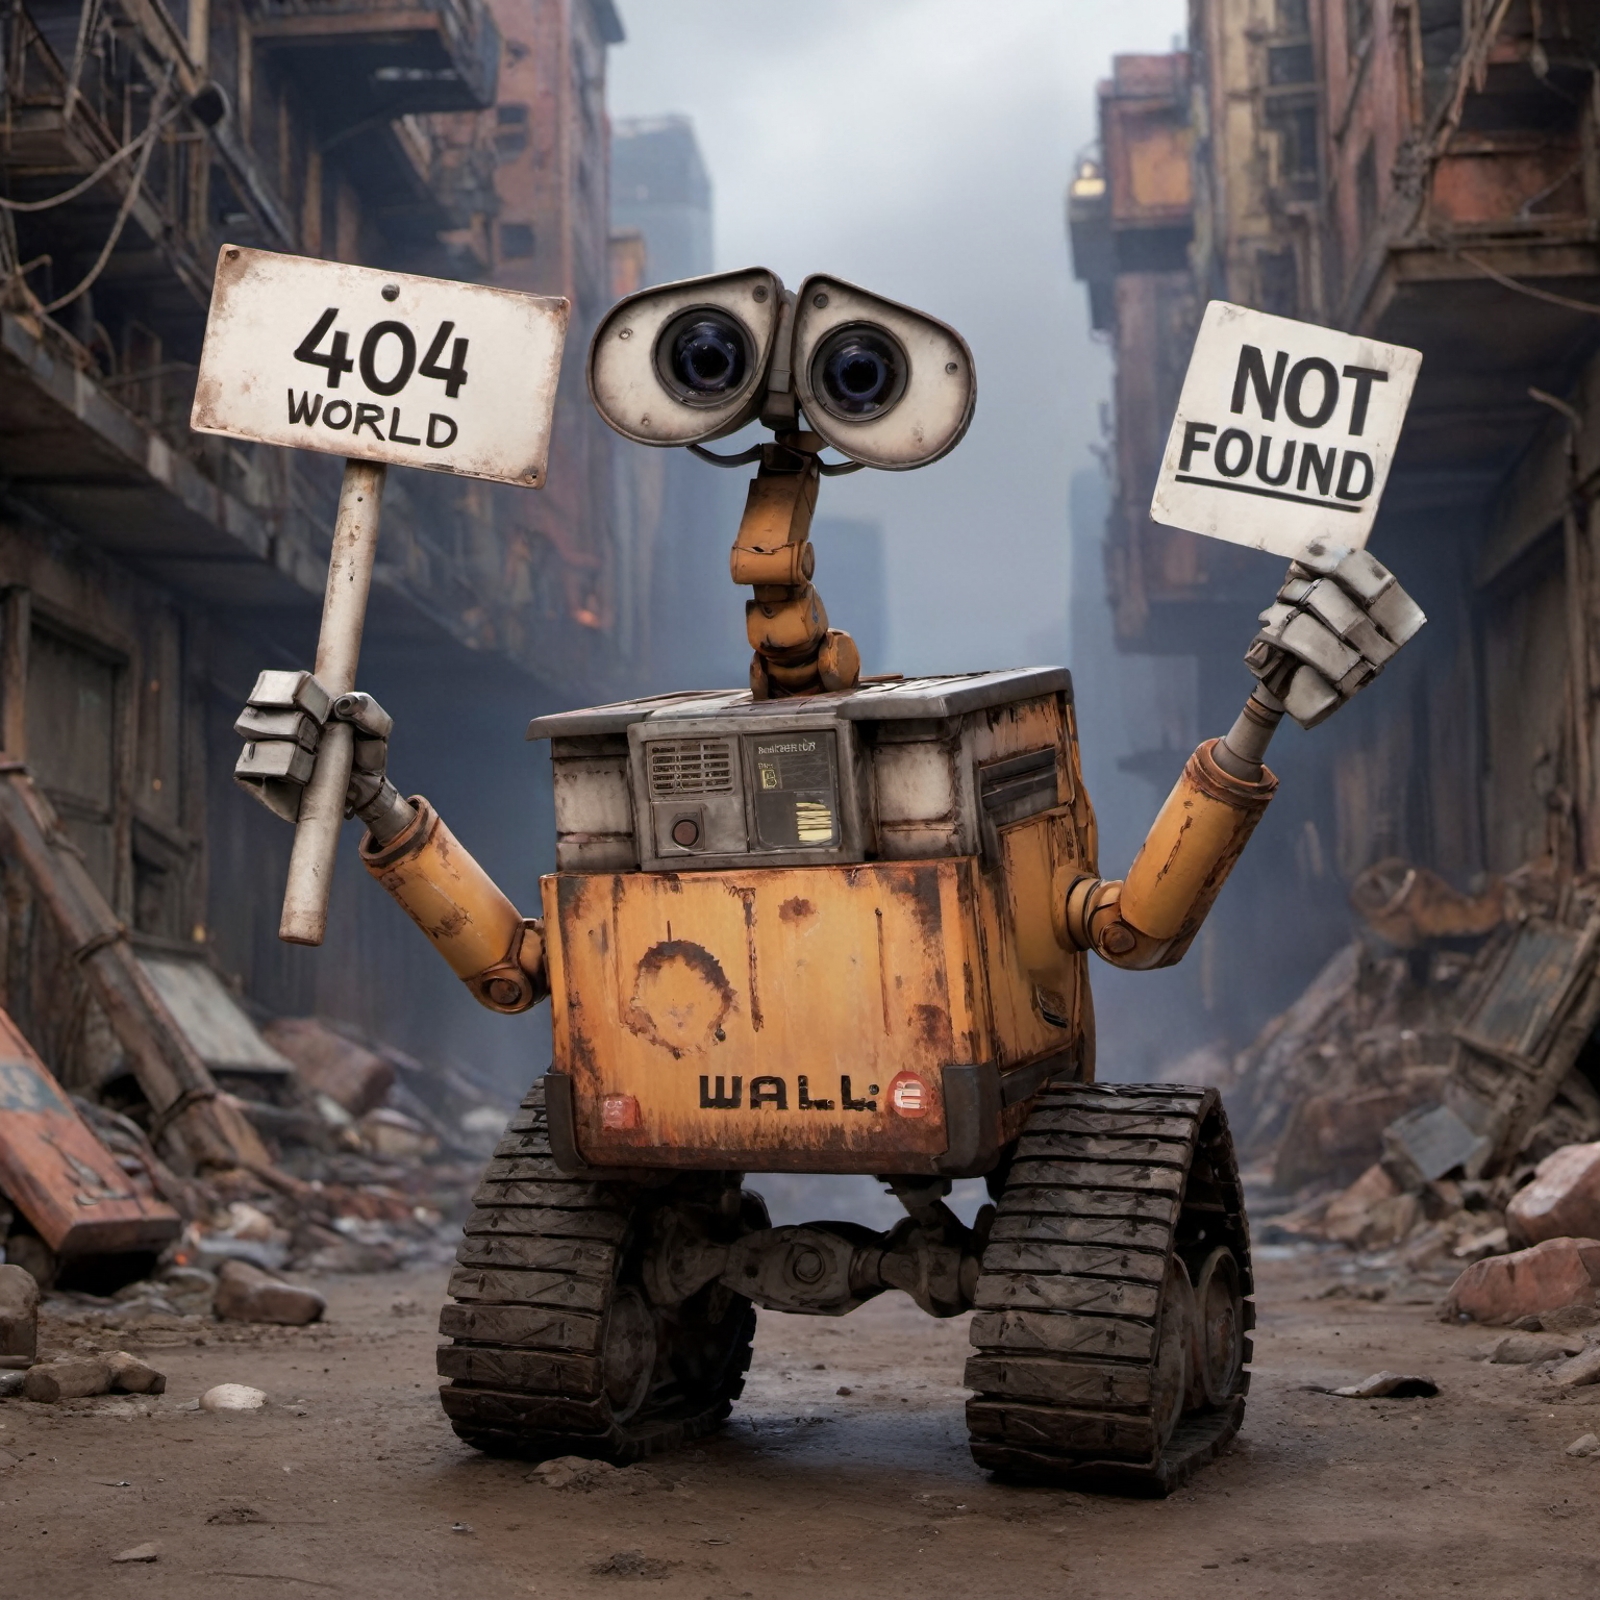 A Wall-E robot is holding a "404 Not Found" sign.